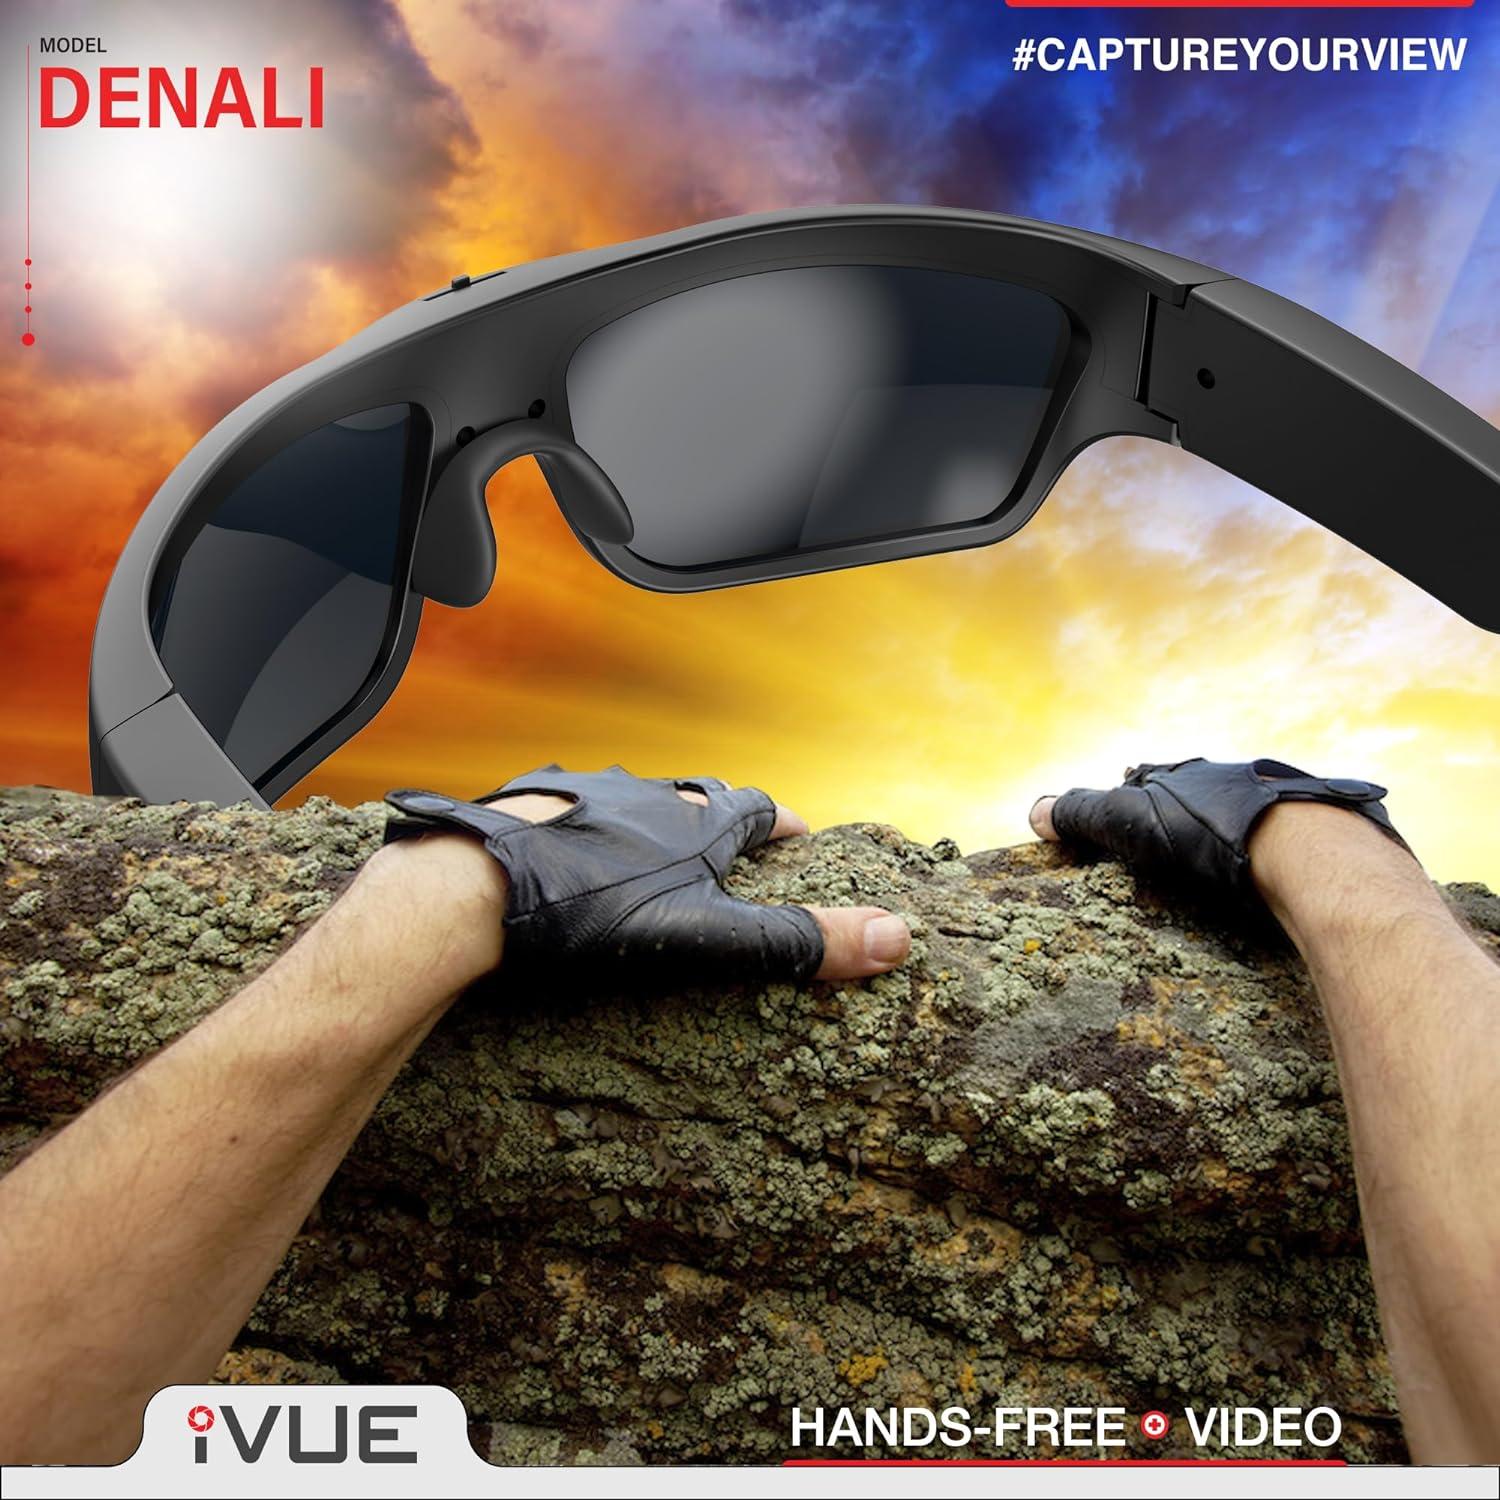 ViView G2S Remote Control Video Glasses,Smart Camera Sunglasses with Audio  and Video Recording FHD 1080P for Motorcycle Riding Mountaineering Camping  Hiking and Driving (G2S-32G) price in UAE | Amazon UAE | kanbkam